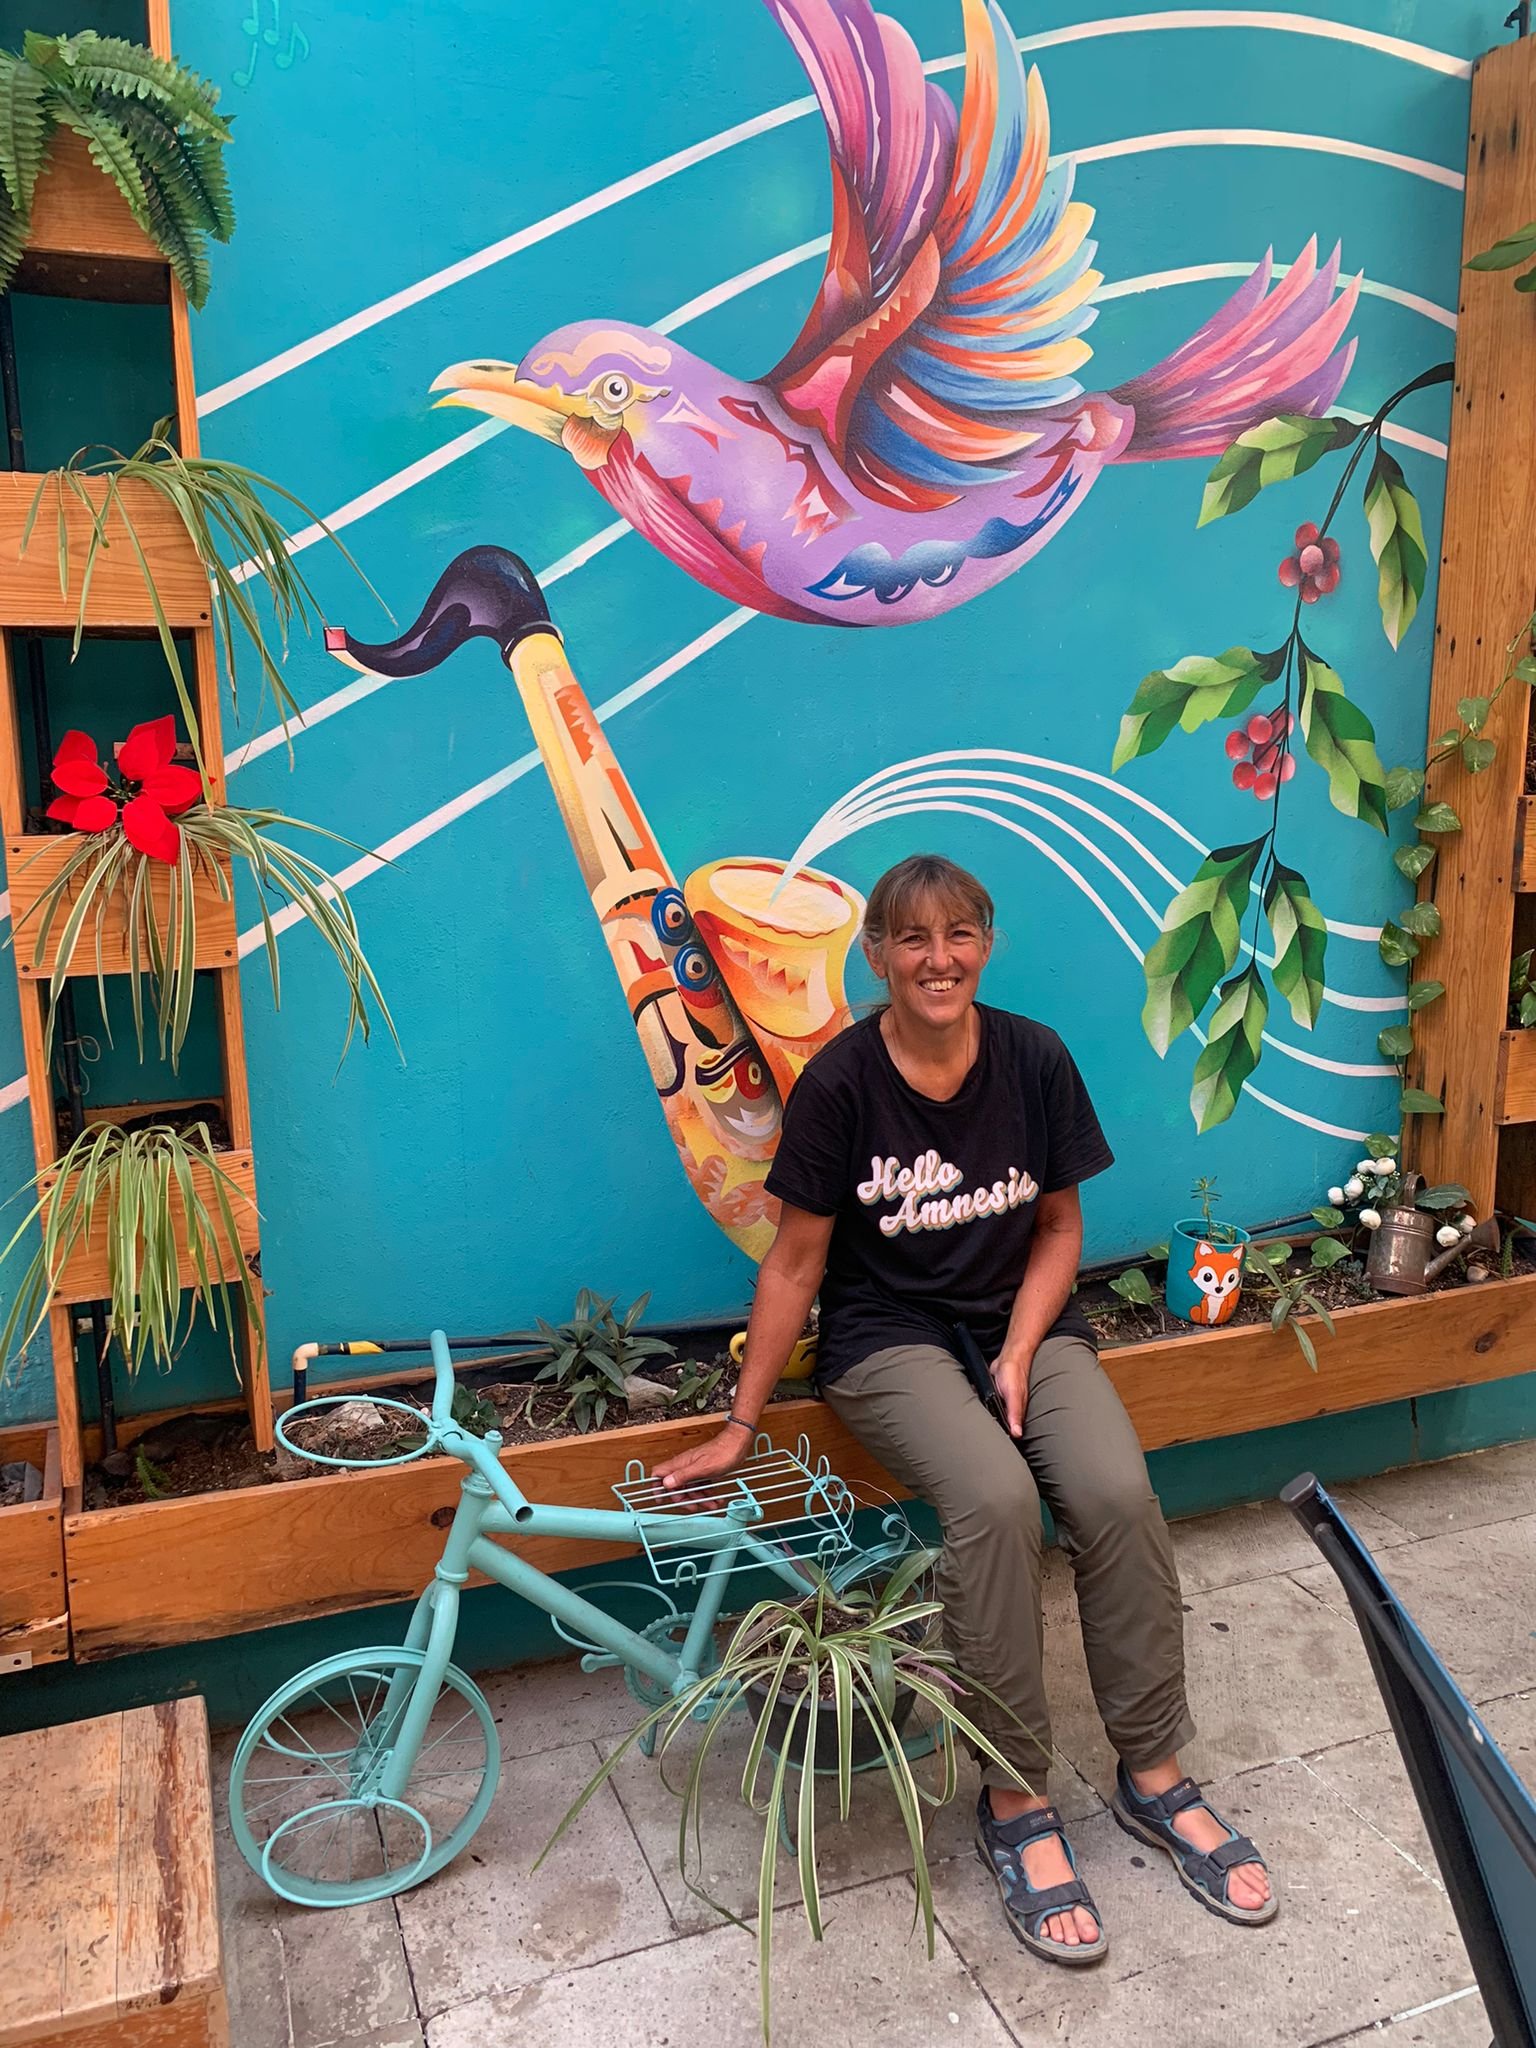  Carla is sitting in front of a mural in Mexico. It has a bright blue background with a multi-coloured bird and a saxophone painted on it. Next to her is an ornamental planter shaped like a bicycle. She is wearing a black t-shirt with ‘Hello Amnesia’